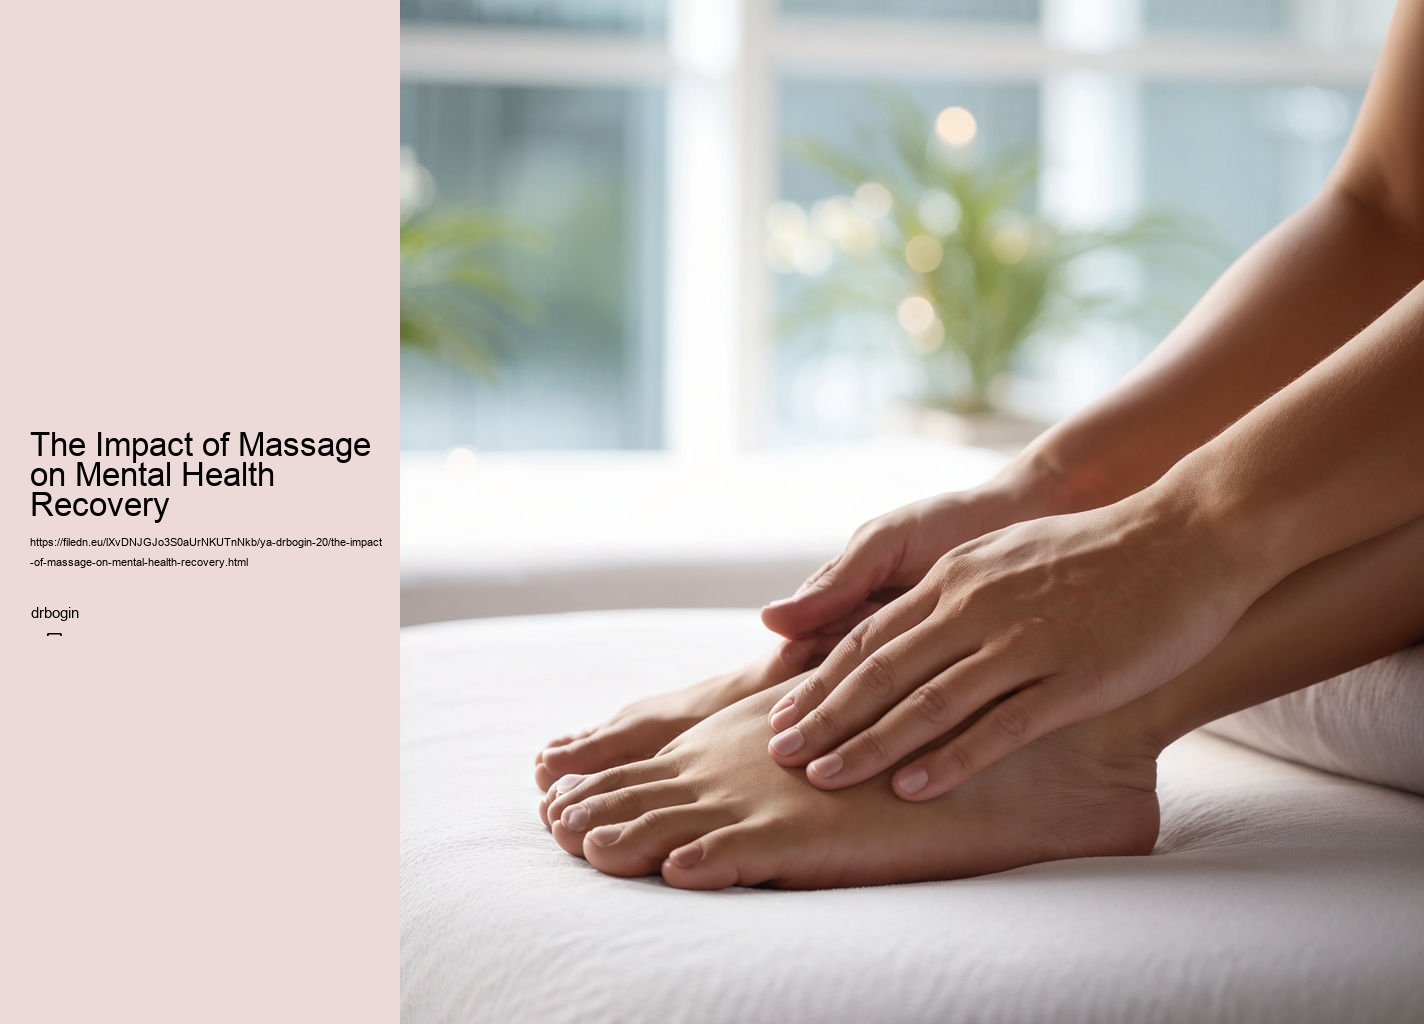 The Impact of Massage on Mental Health Recovery